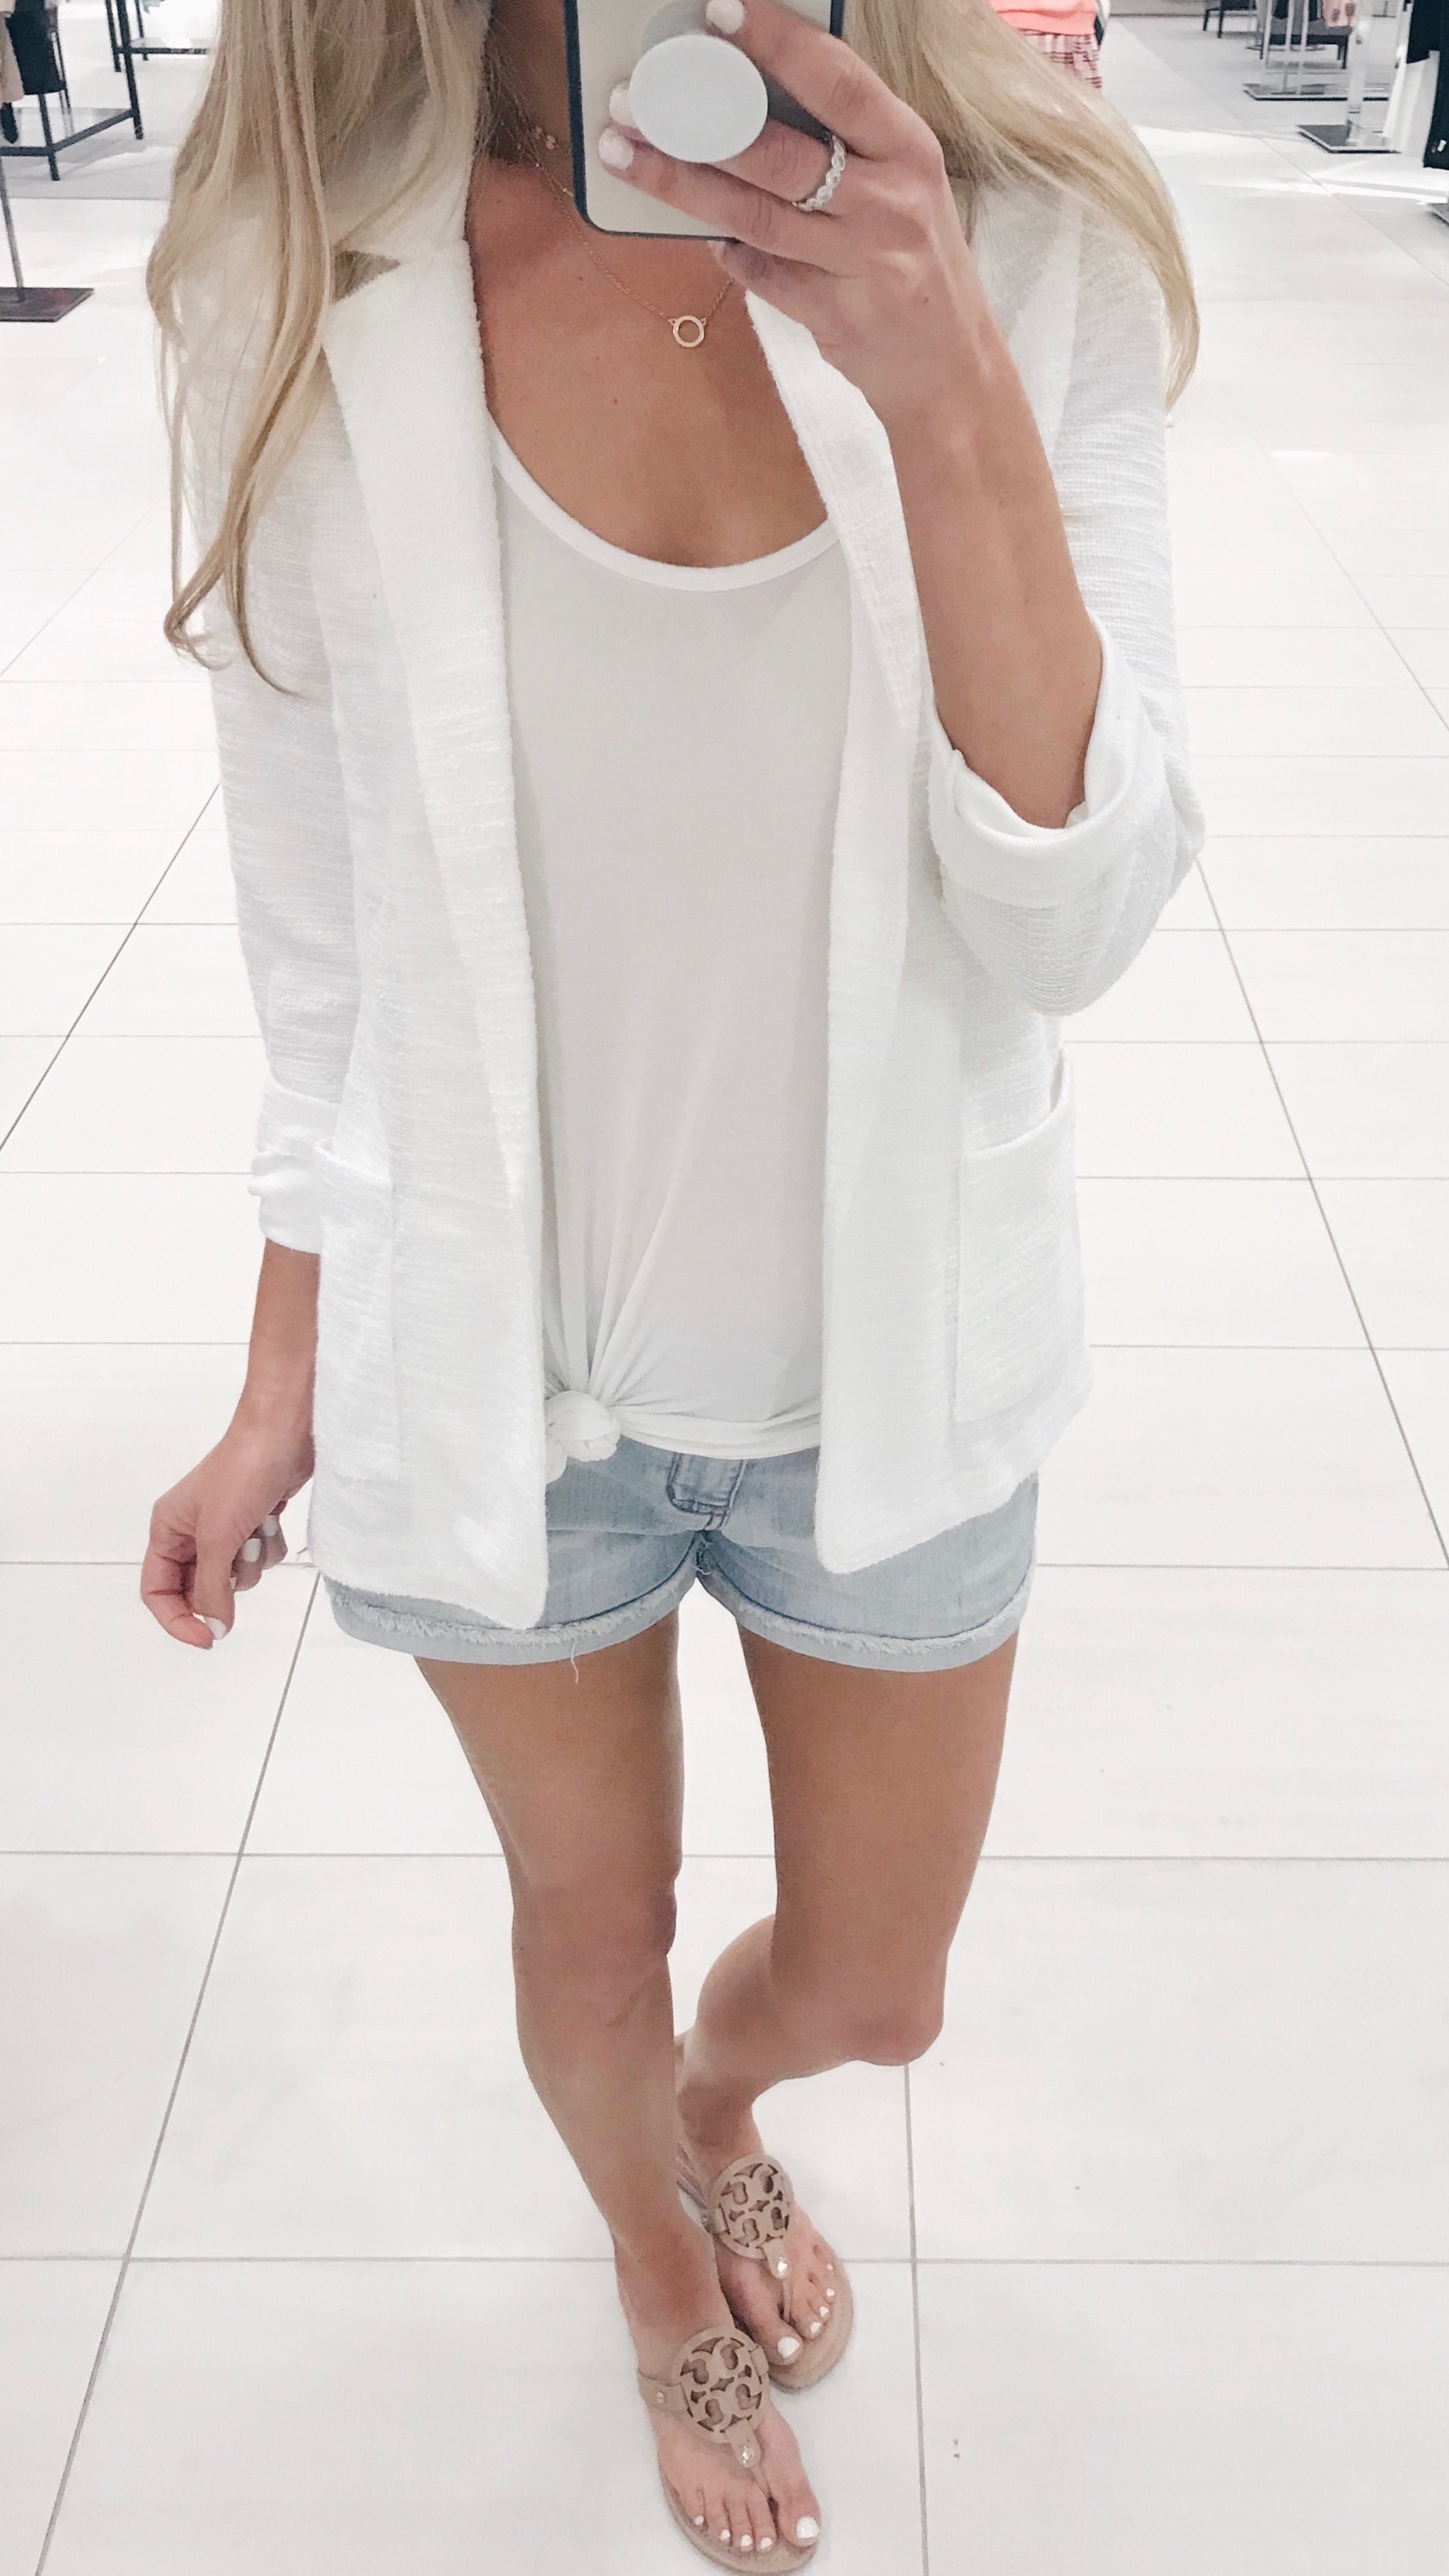 Early Summer Outfits - White Blazer/Tory Burch Sandals